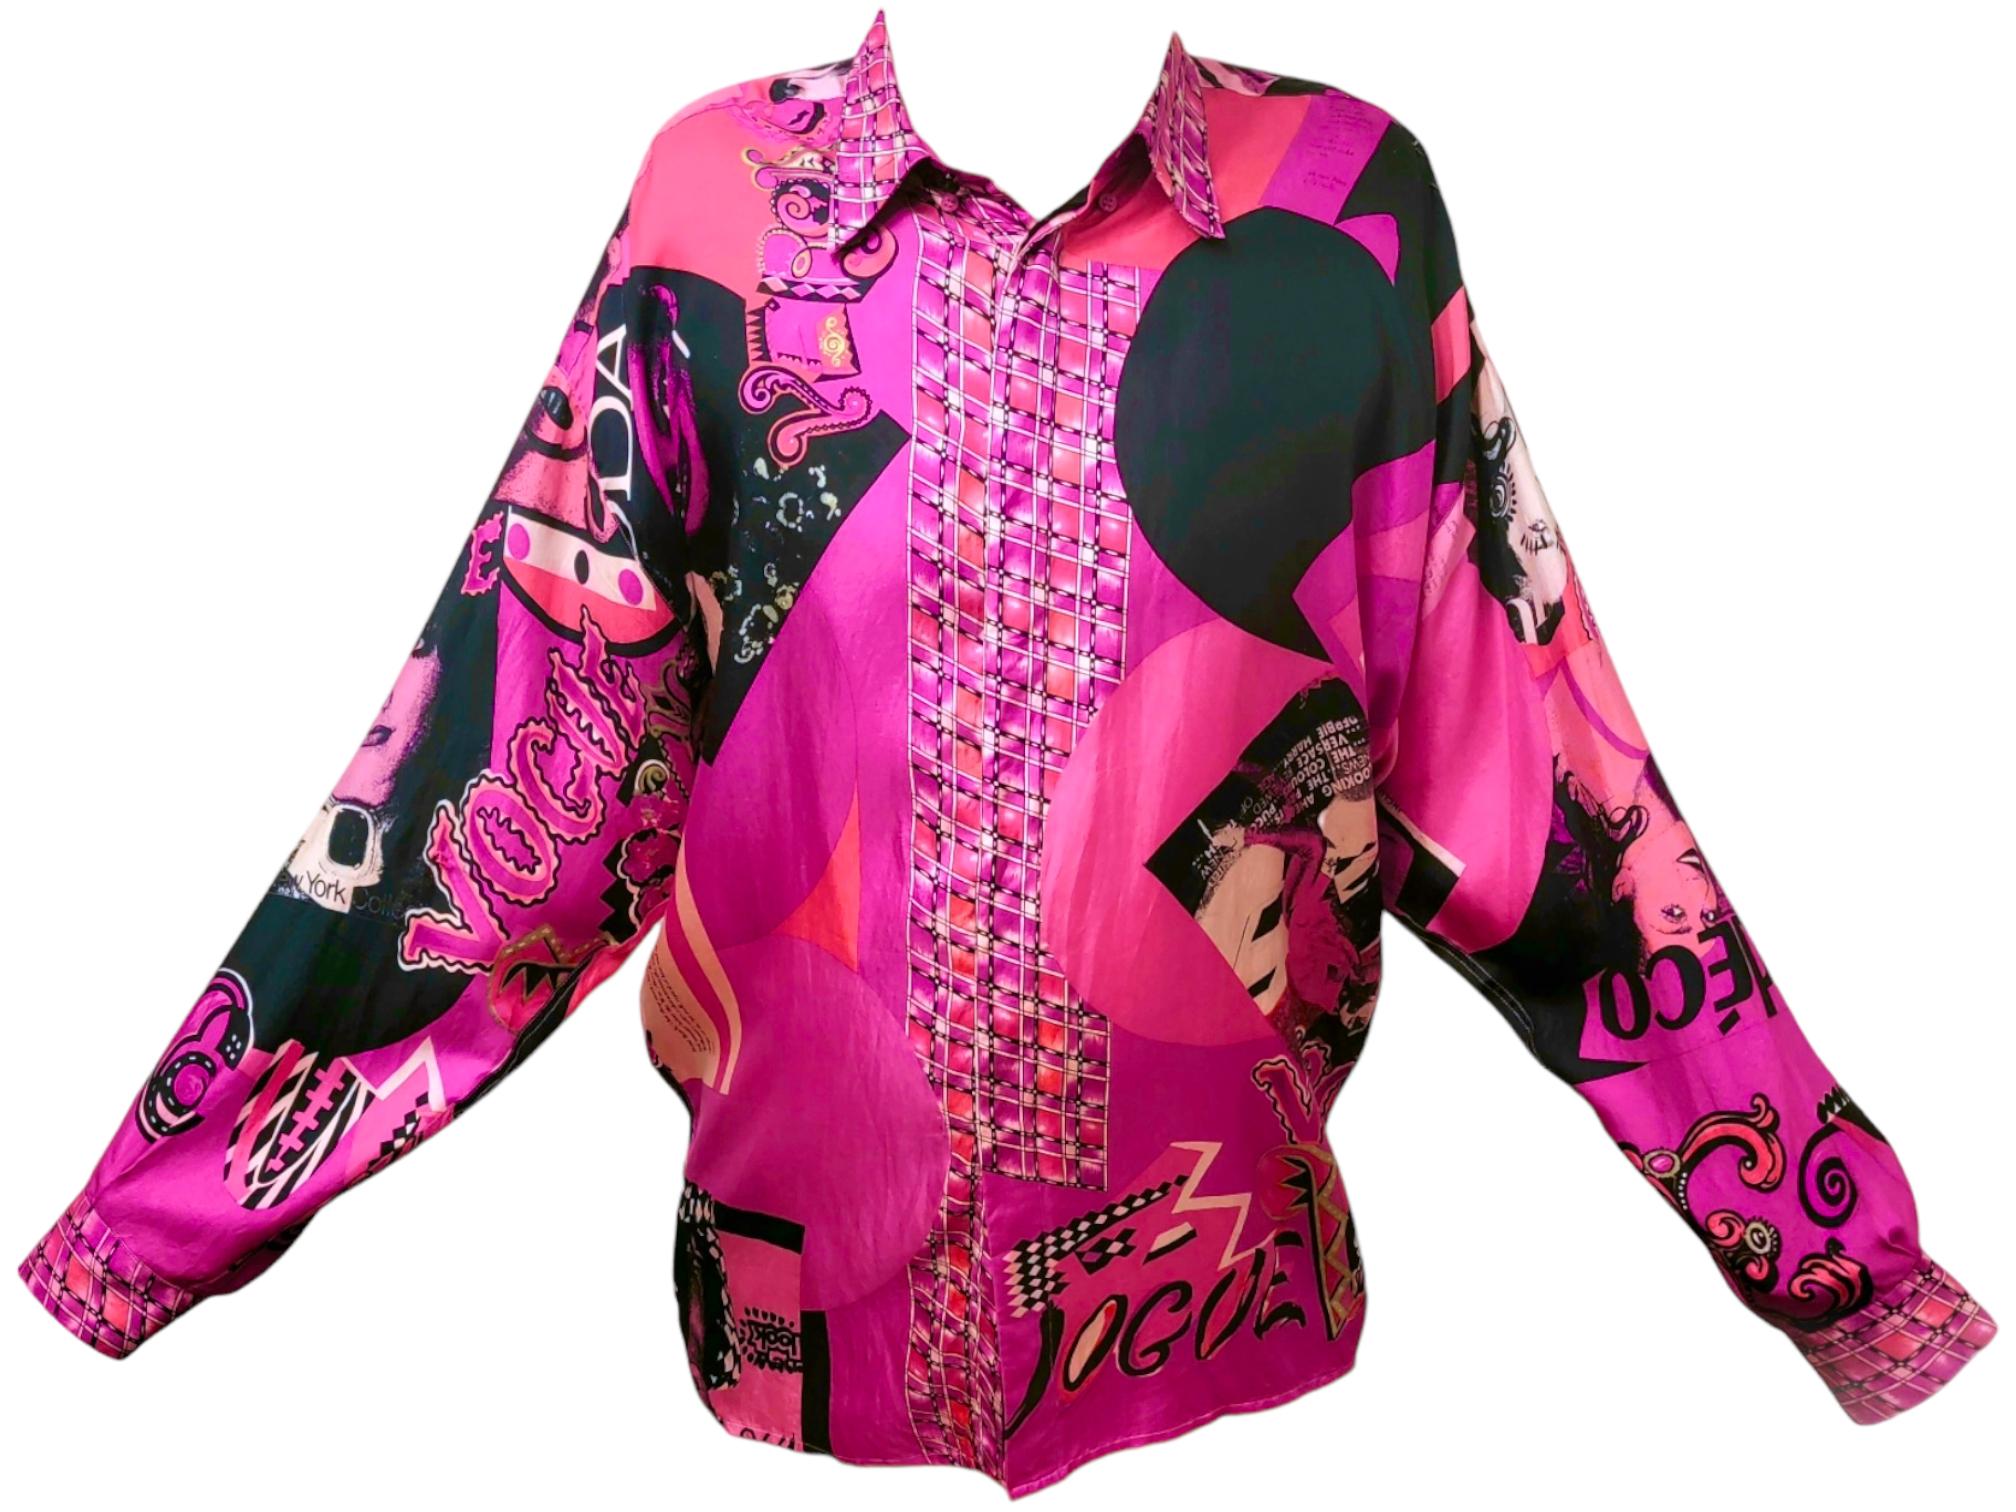 Museum worthy and original Gianni Versace lifetime “Vogue” magazine cover printed silk shirt from 1991.

The limited edition Vogue print showcases impeccable reproductions of selected Vogue Magazine covers in vivid, exceptionally scarce shades of